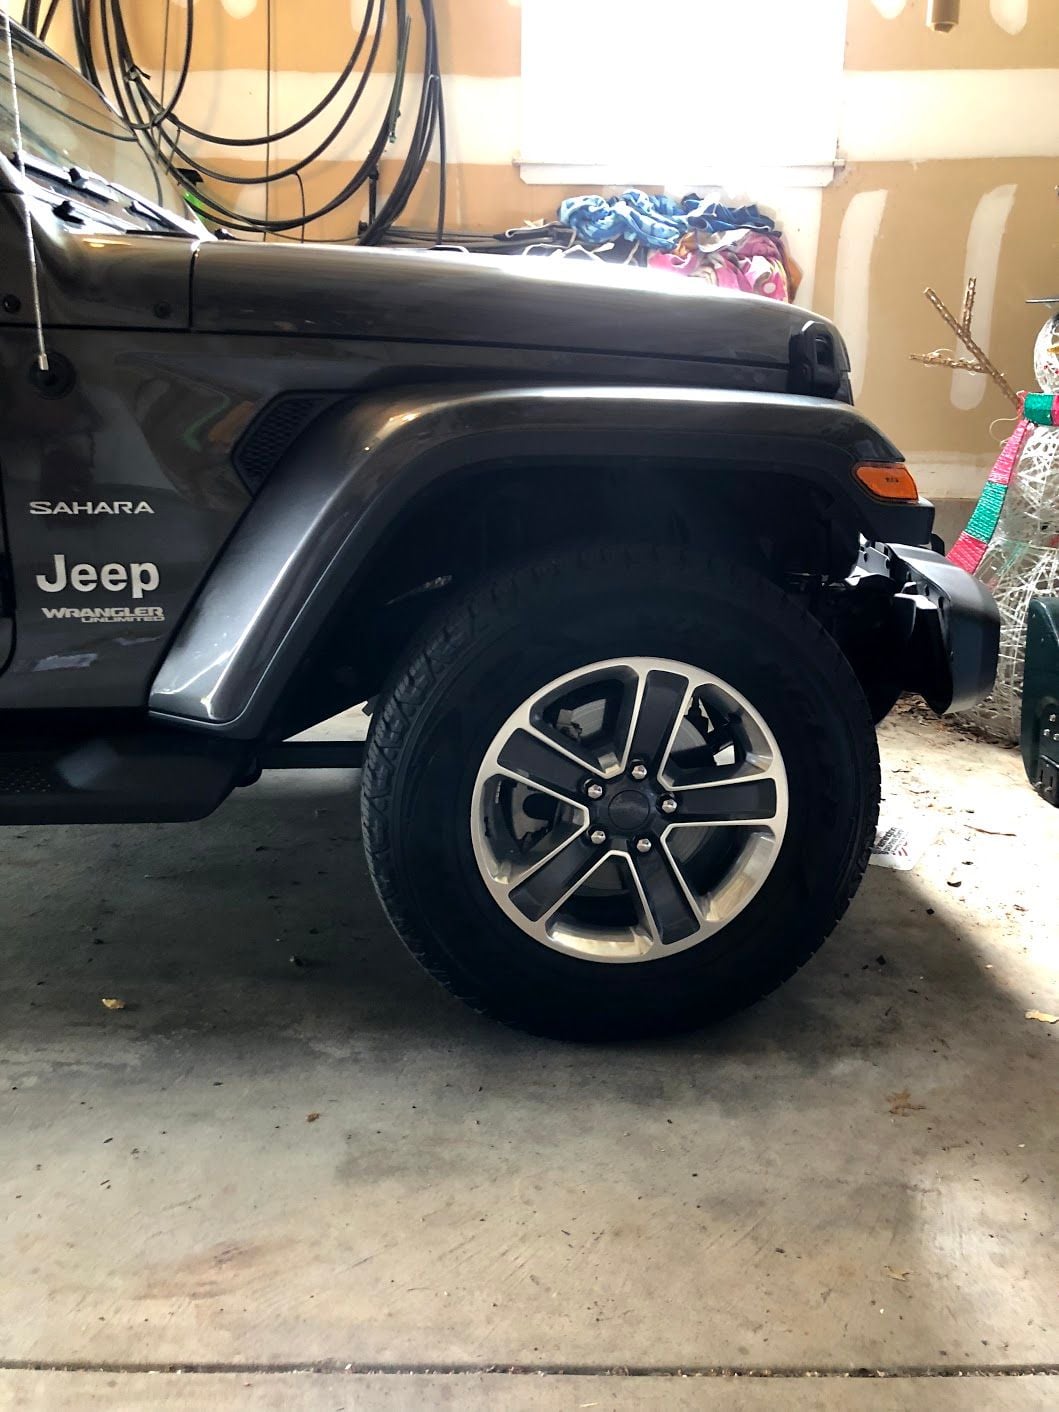 Wheels and Tires/Axles - WTS - NYNJ - TAKEOFFS from 2018 JLUS, Wheels/Tires/TPMS - Used - 2012 to 2018 Jeep Wrangler - Hillsborough, NJ 08844, United States